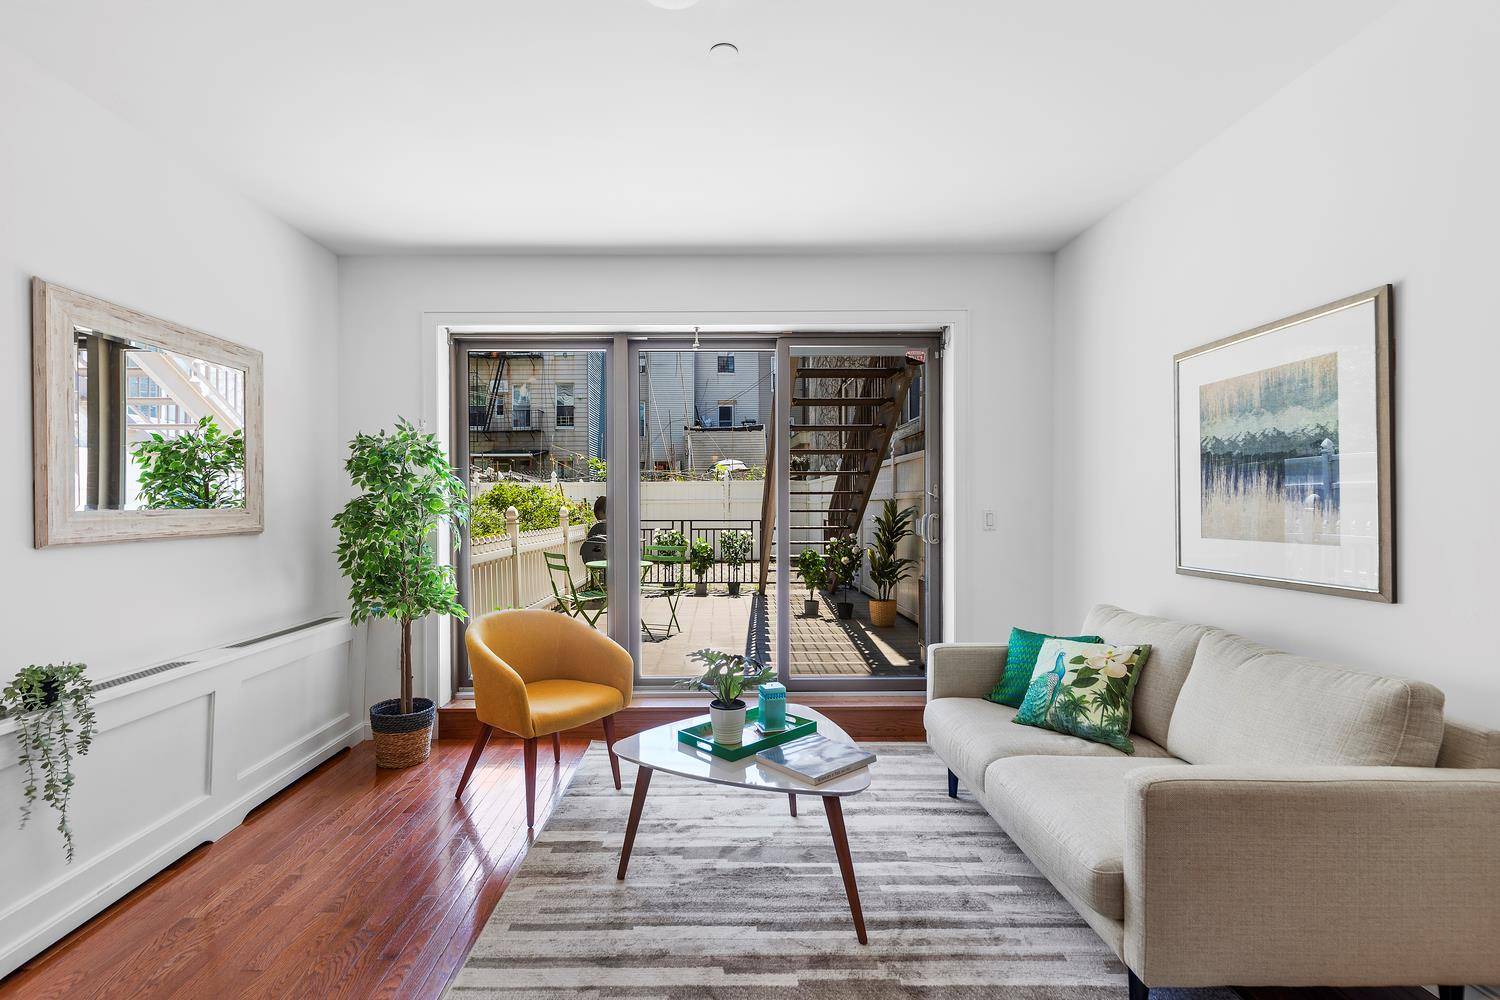 Welcome to this lovely home with a large private patio in the heart of Greenpoint, Brooklyn.